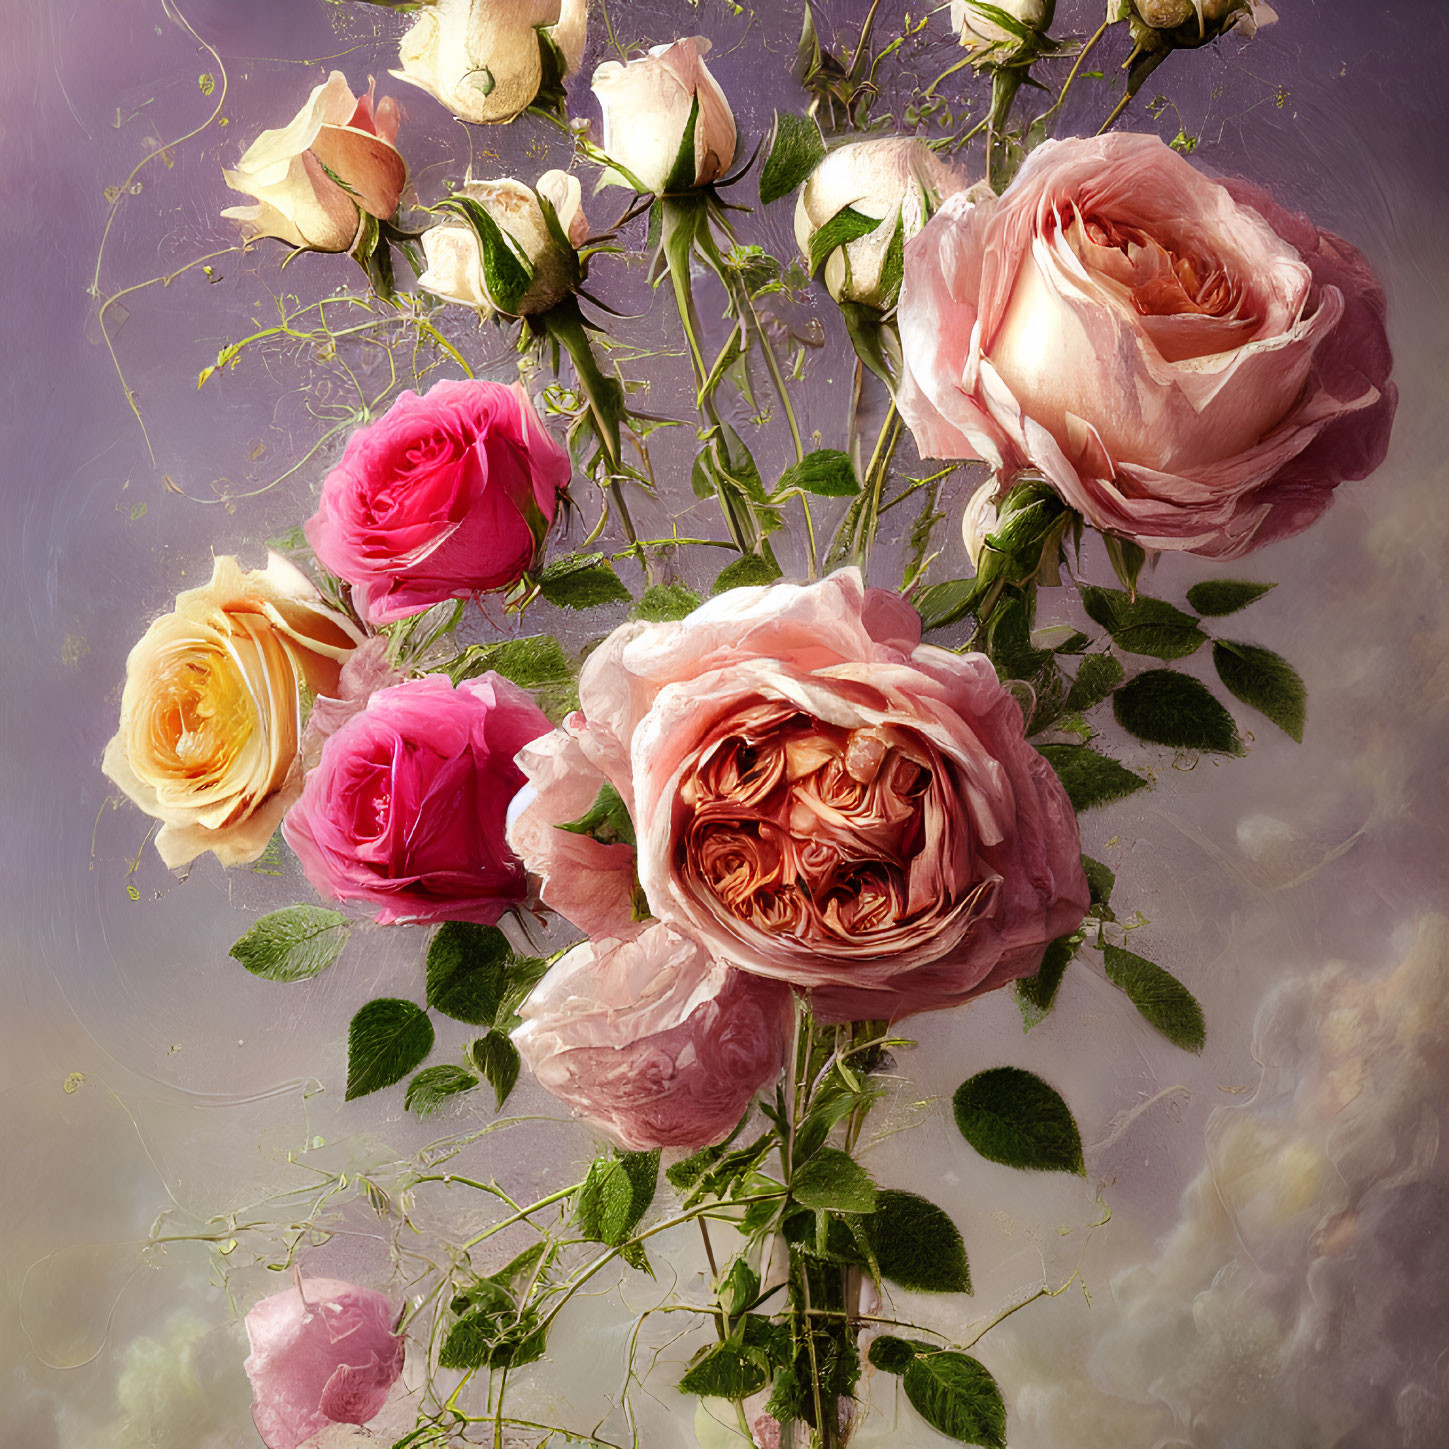 Roses in Pink, Peach, and Cream Against Purple Background